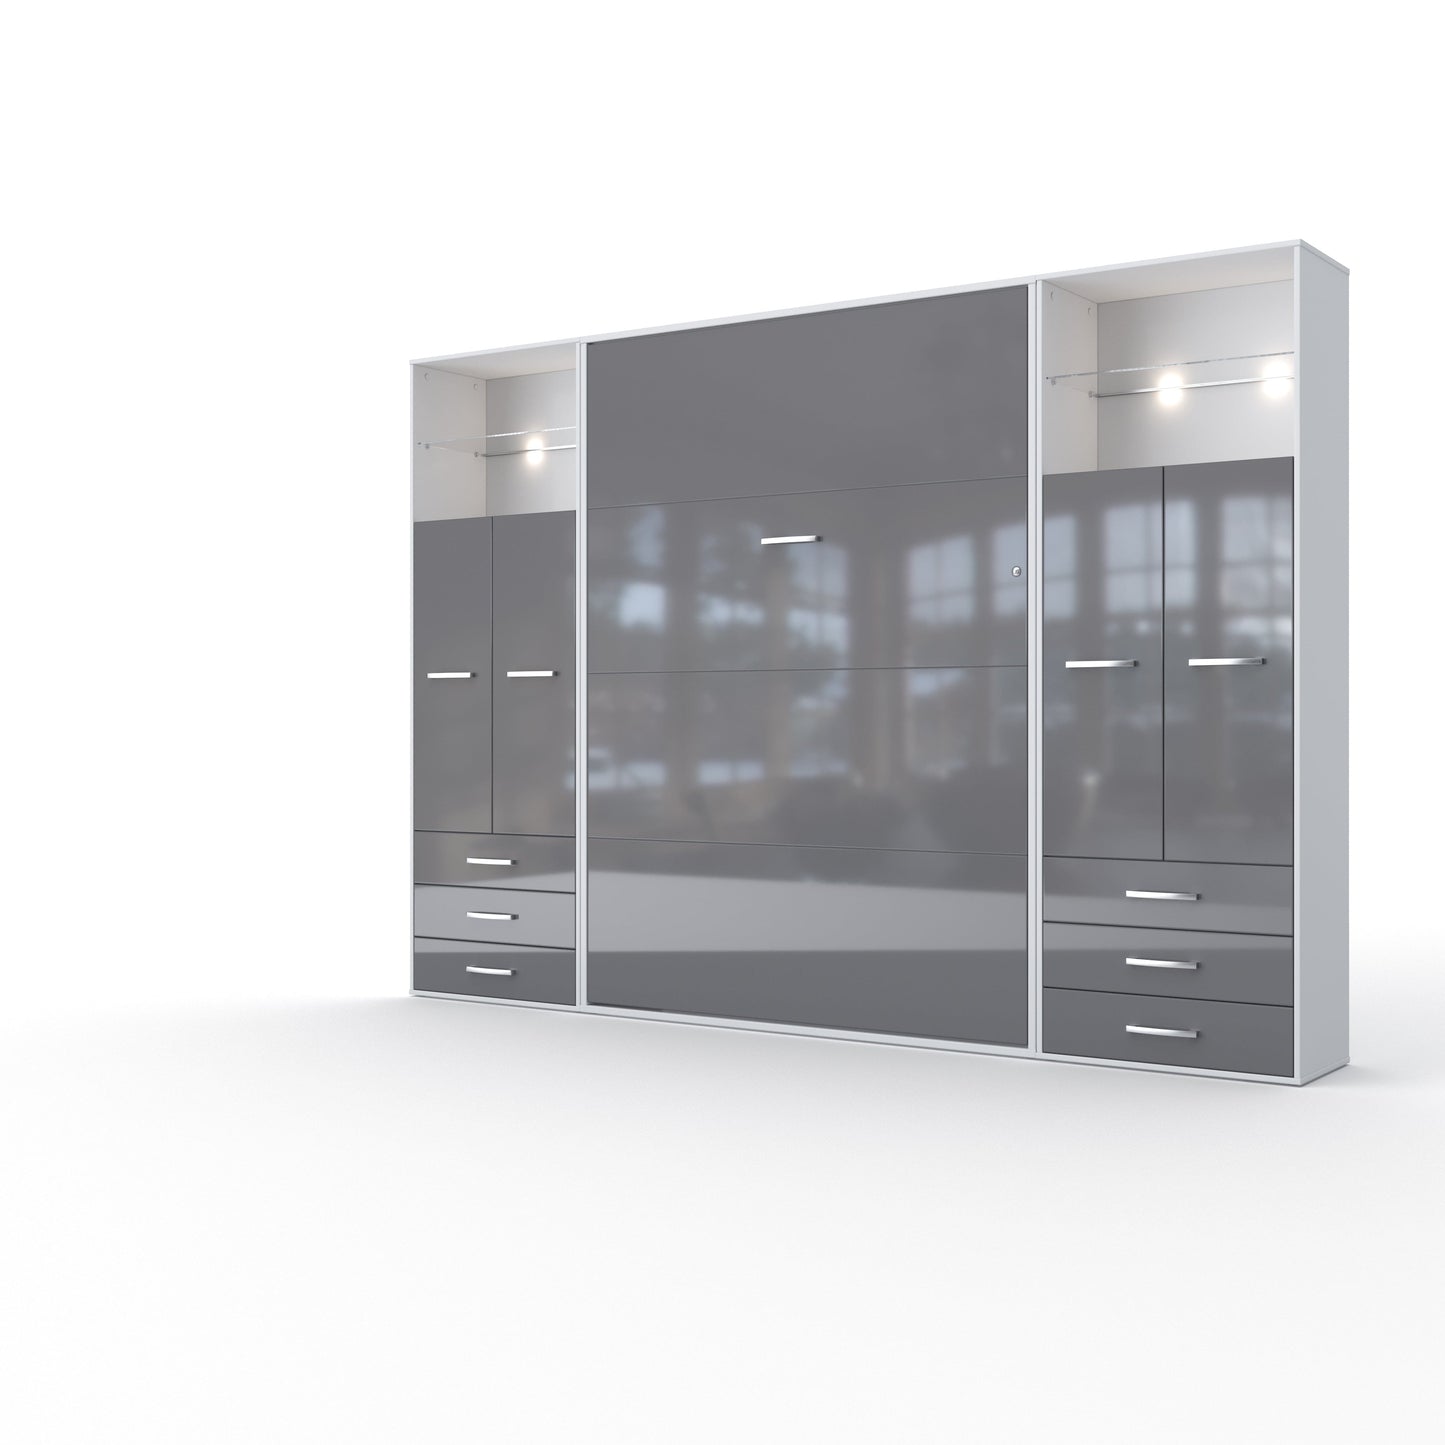 Maxima House Maxima House Vertical Murphy Bed Invento , European Full XL with 2 cabinets White/Grey IN140V-10WG